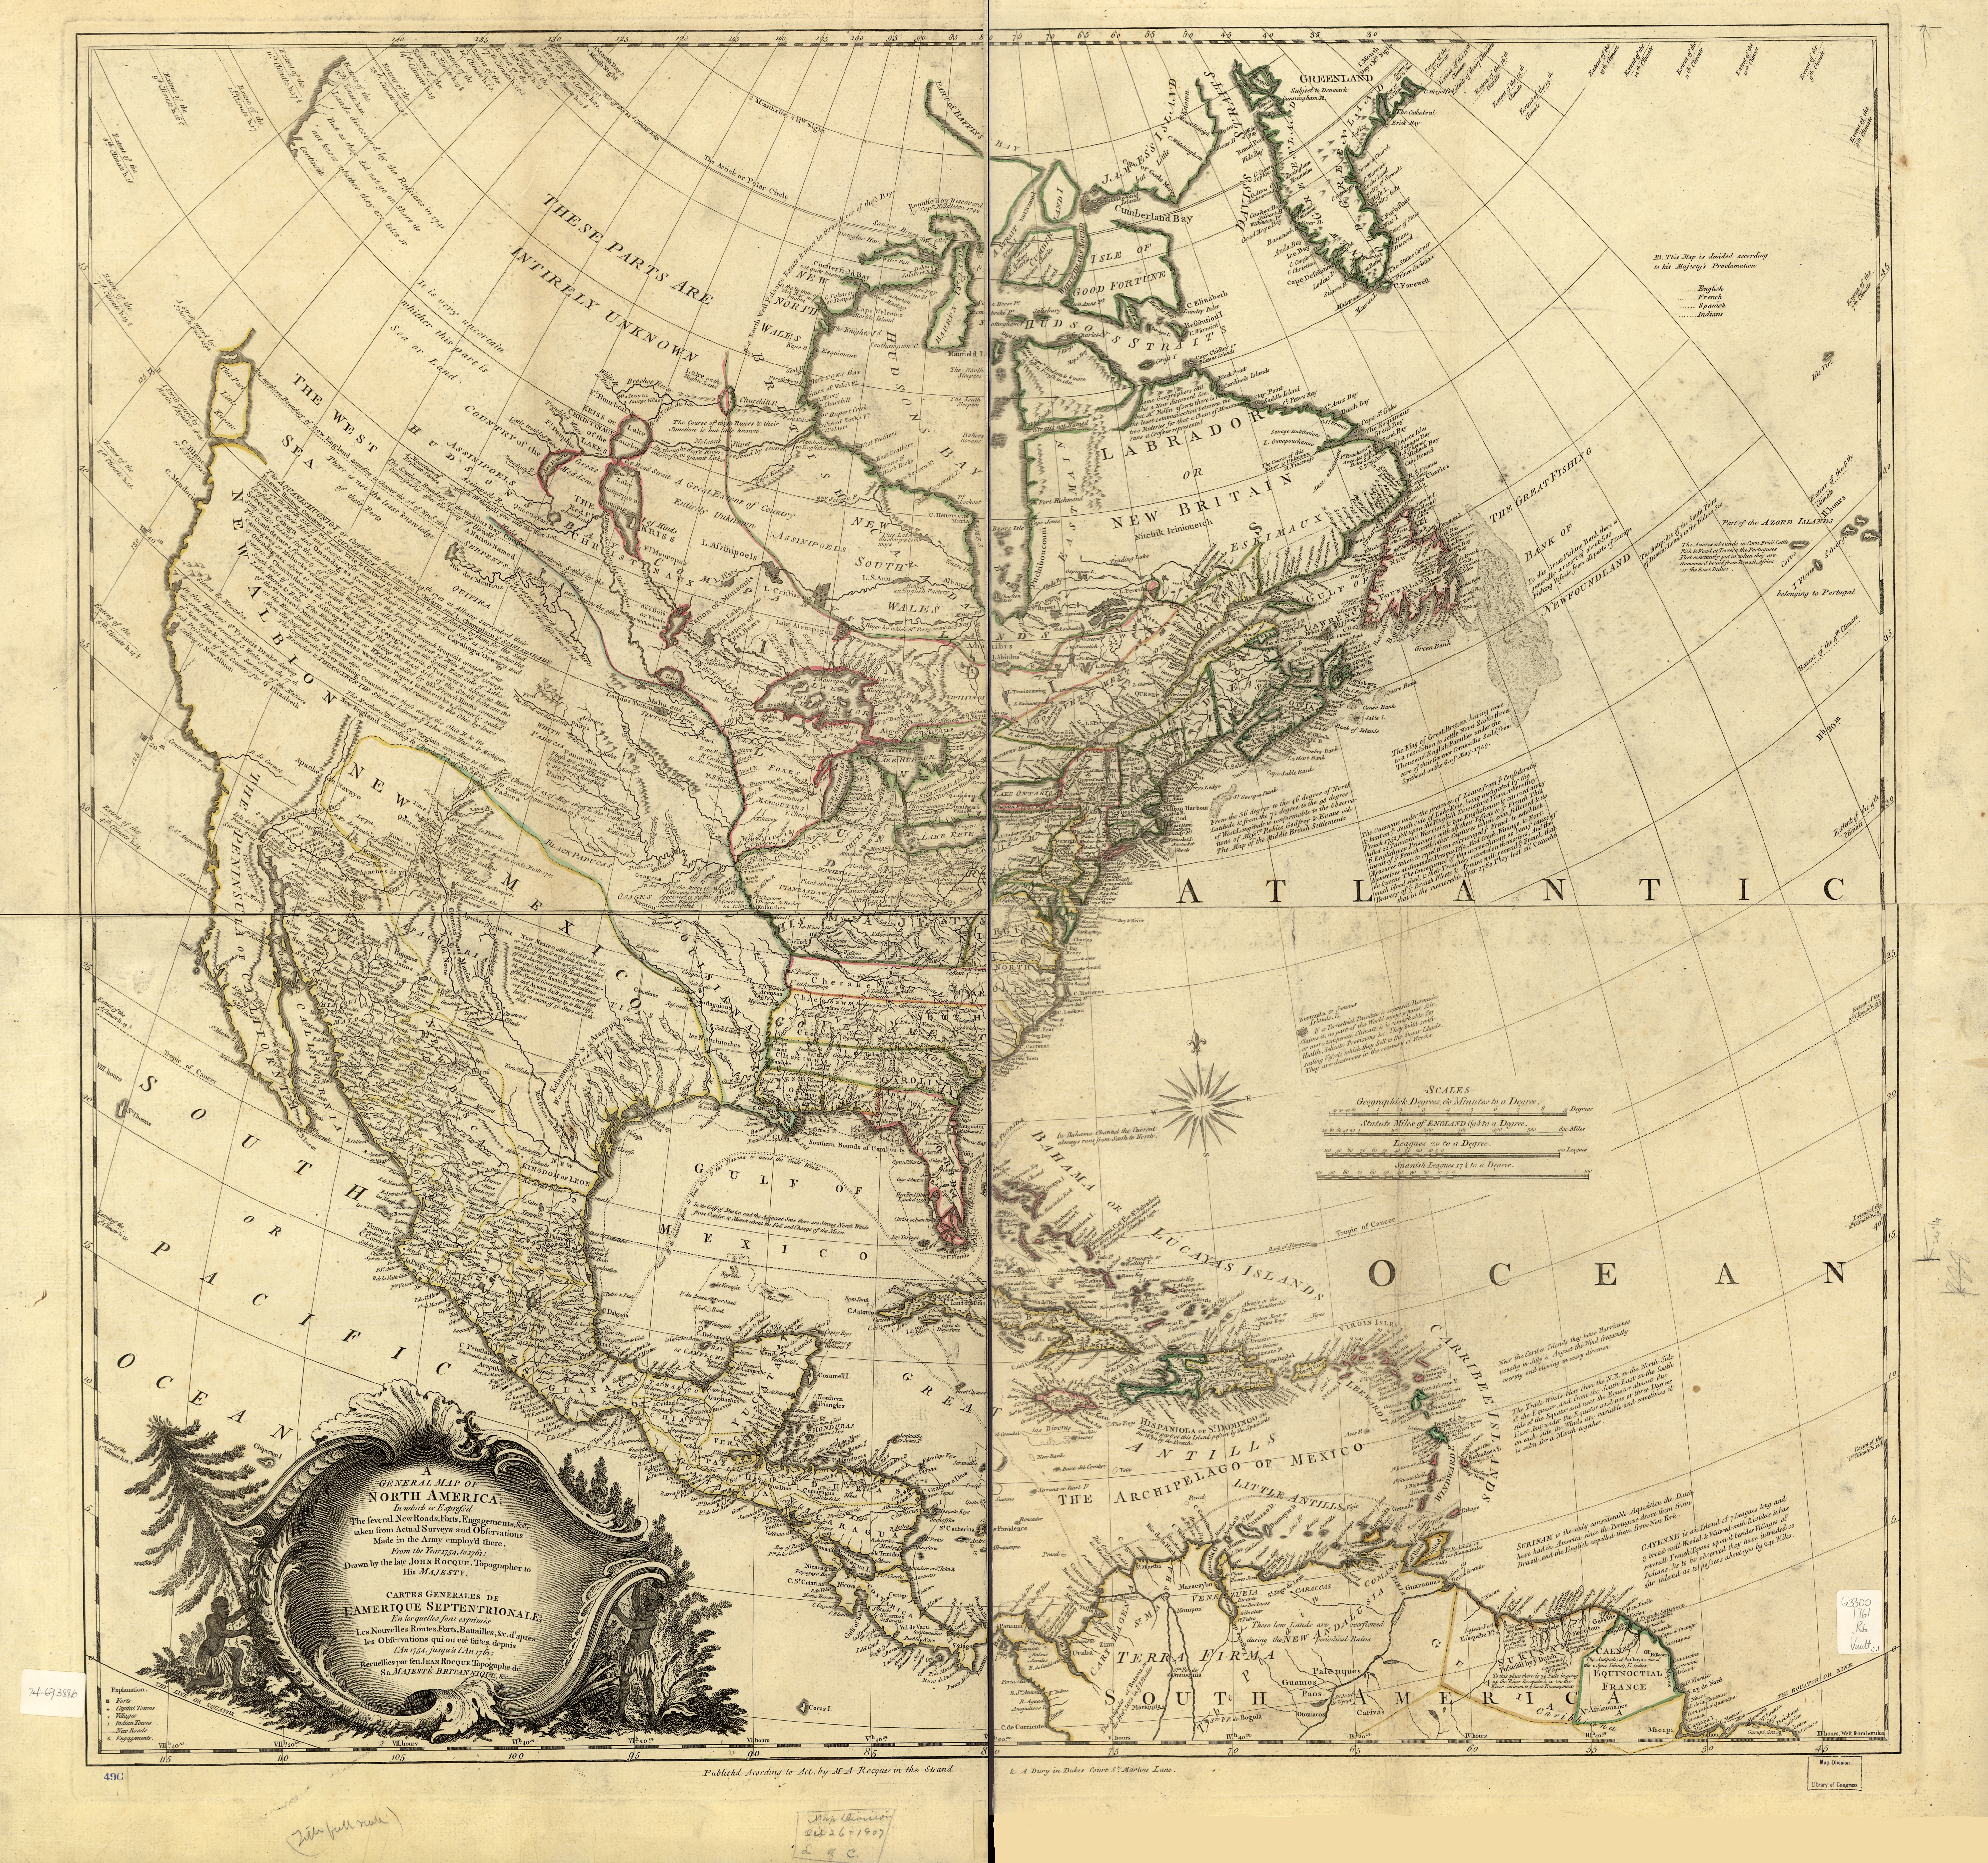 LifeOfTheSaltonSea.ORG- A General Map of North America is a detailed drawing of the contient drawn by John Rocque.